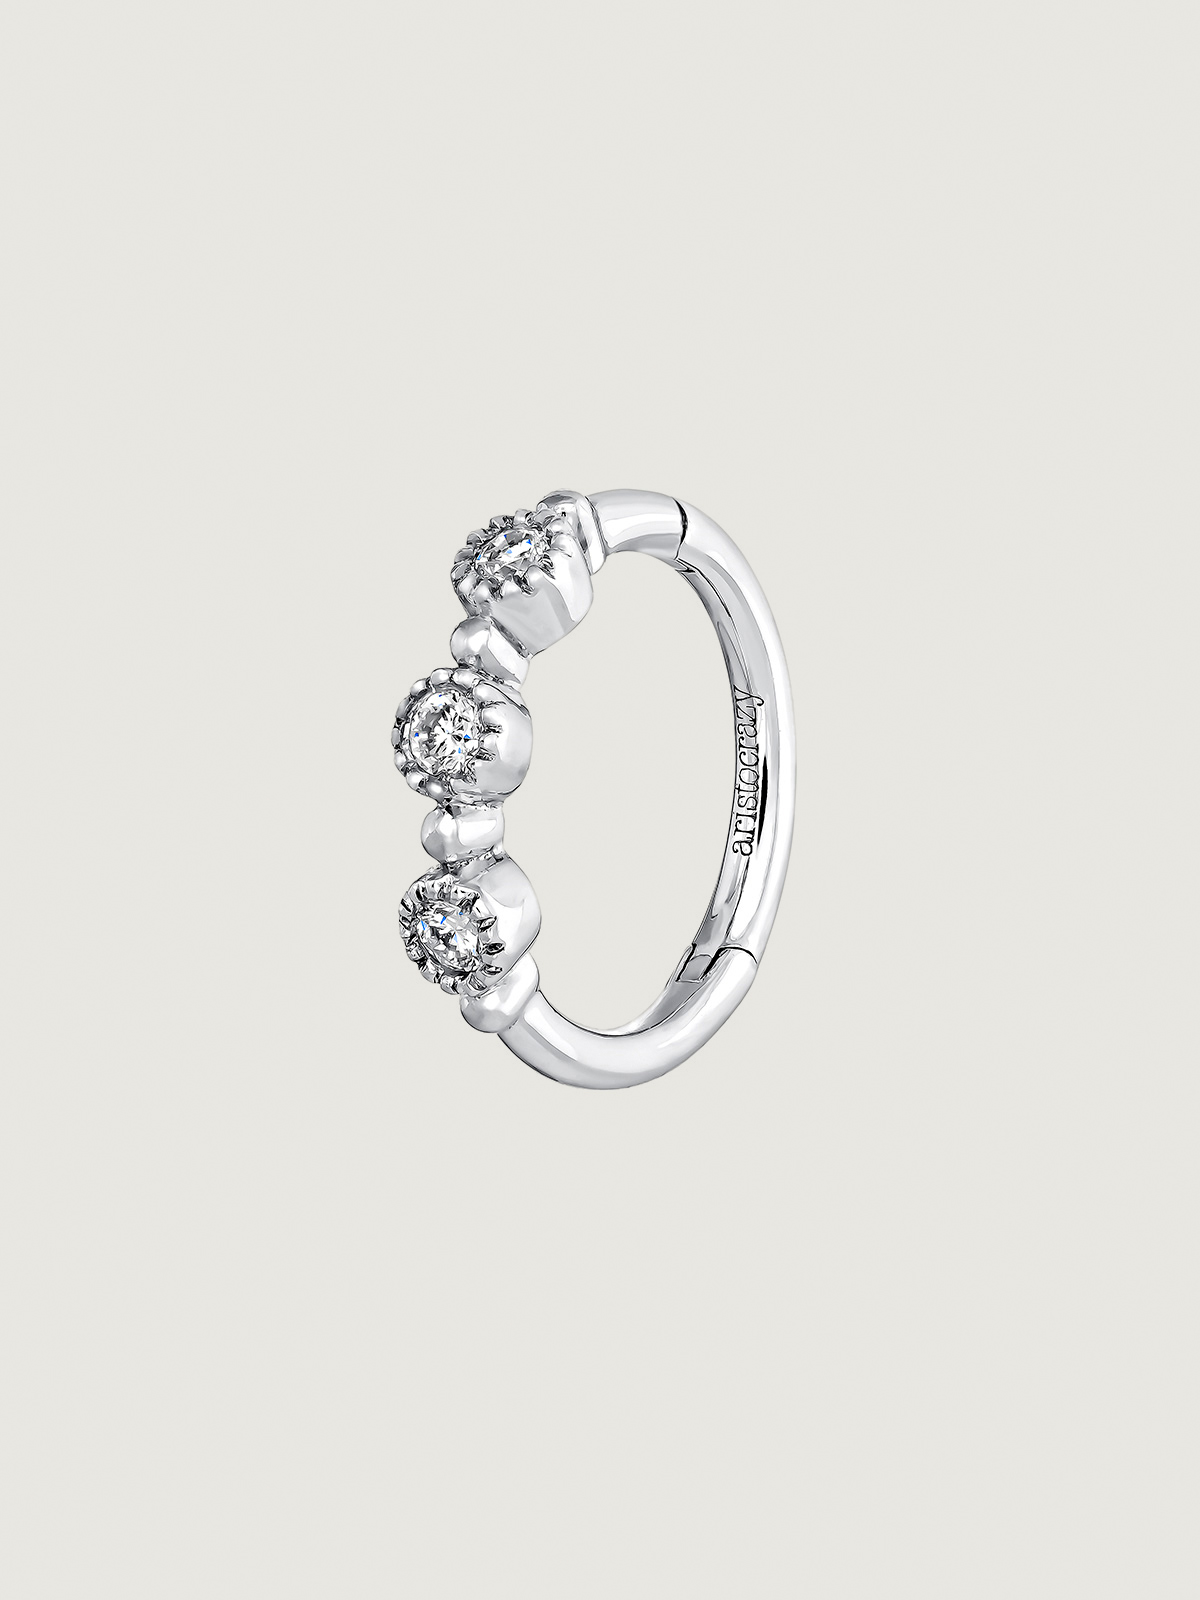 Individual 9K white gold hoop earring with 0.042 cts diamonds.